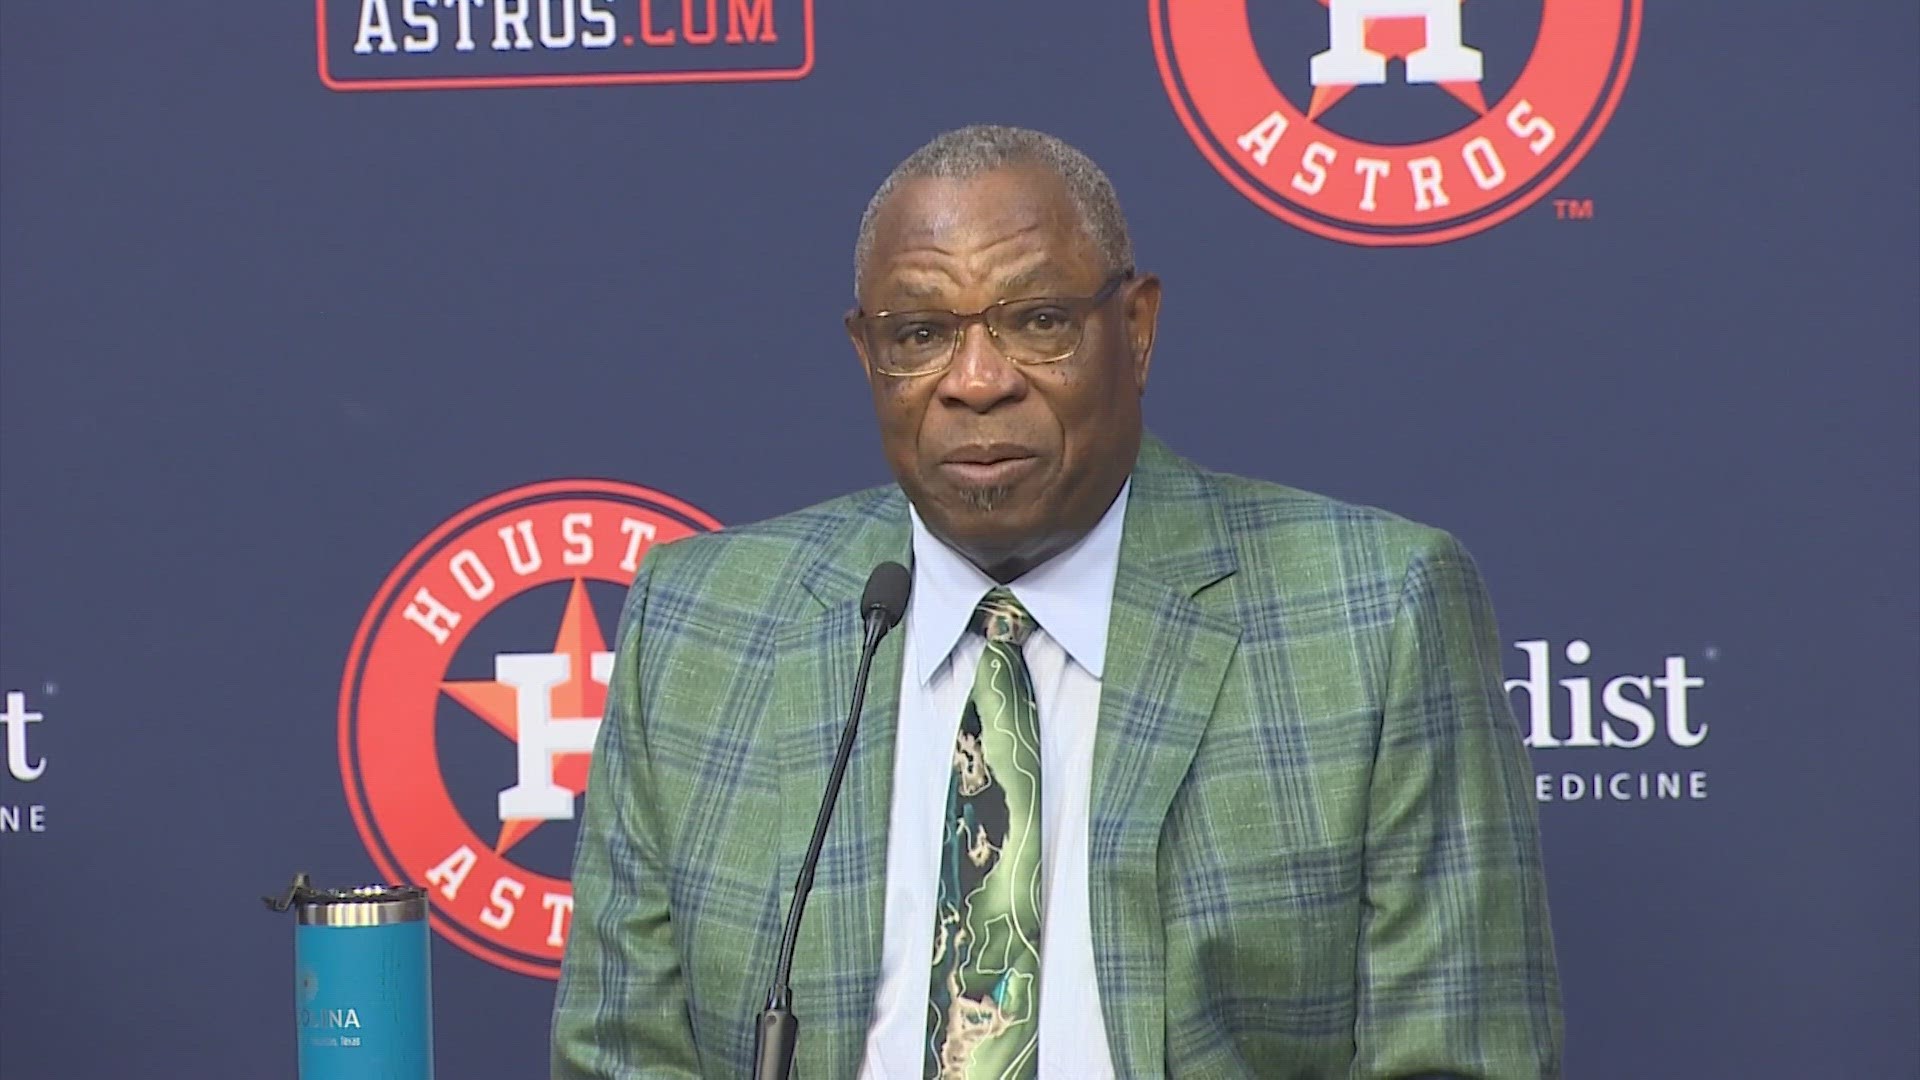 As Dusty Baker officially ended one notable chapter in his illustrious career, he said Thursday he feels an obligation to do more around the game with his next one.